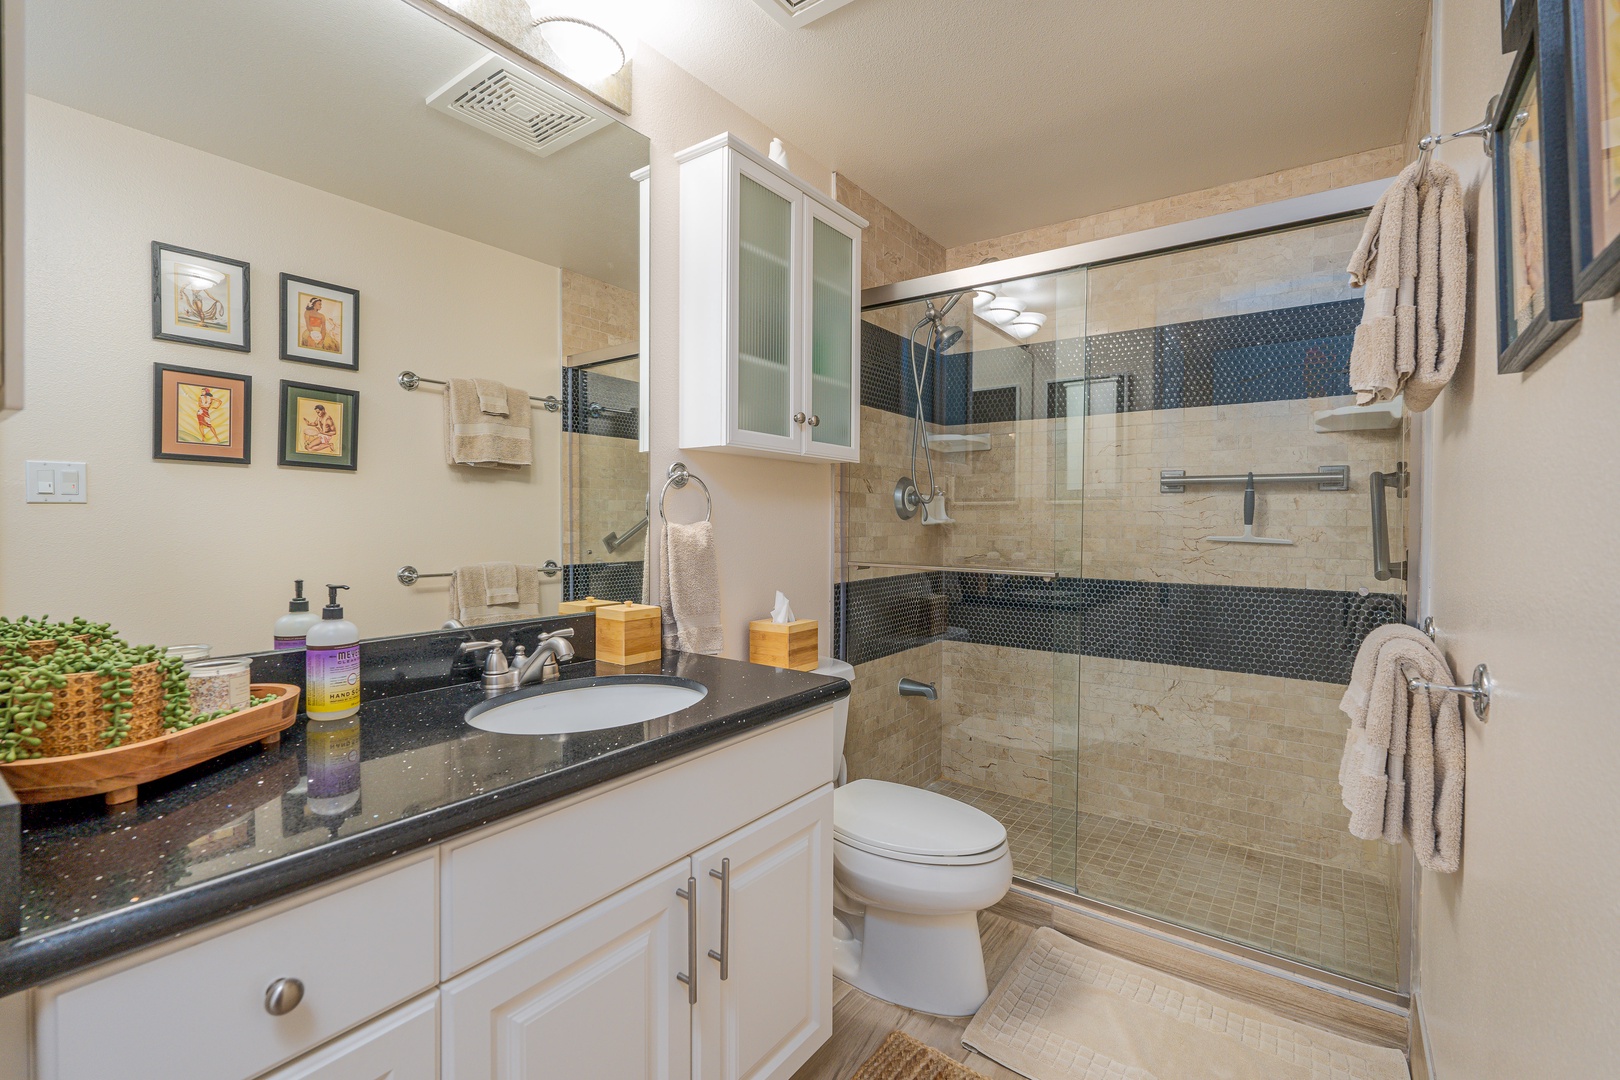 Kapolei Vacation Rentals, Ko Olina Kai 1097C - With an ensuite bathroom with a walk-in shower in a glass enclosure.